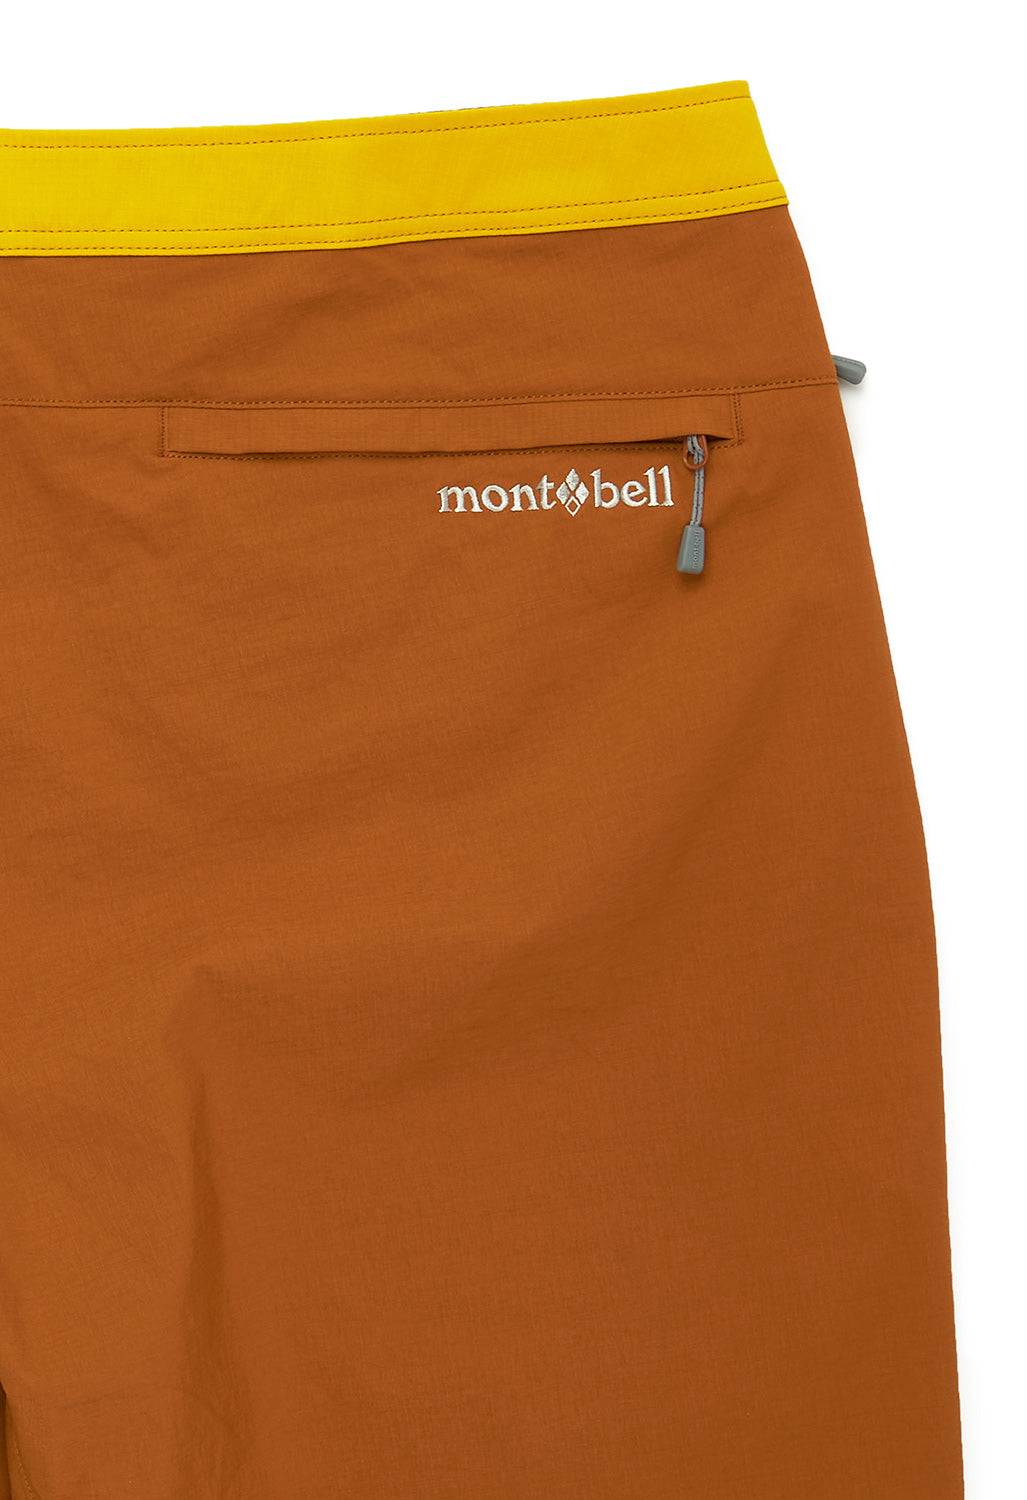 Montbell Men's Canyon Shorts - Yellow